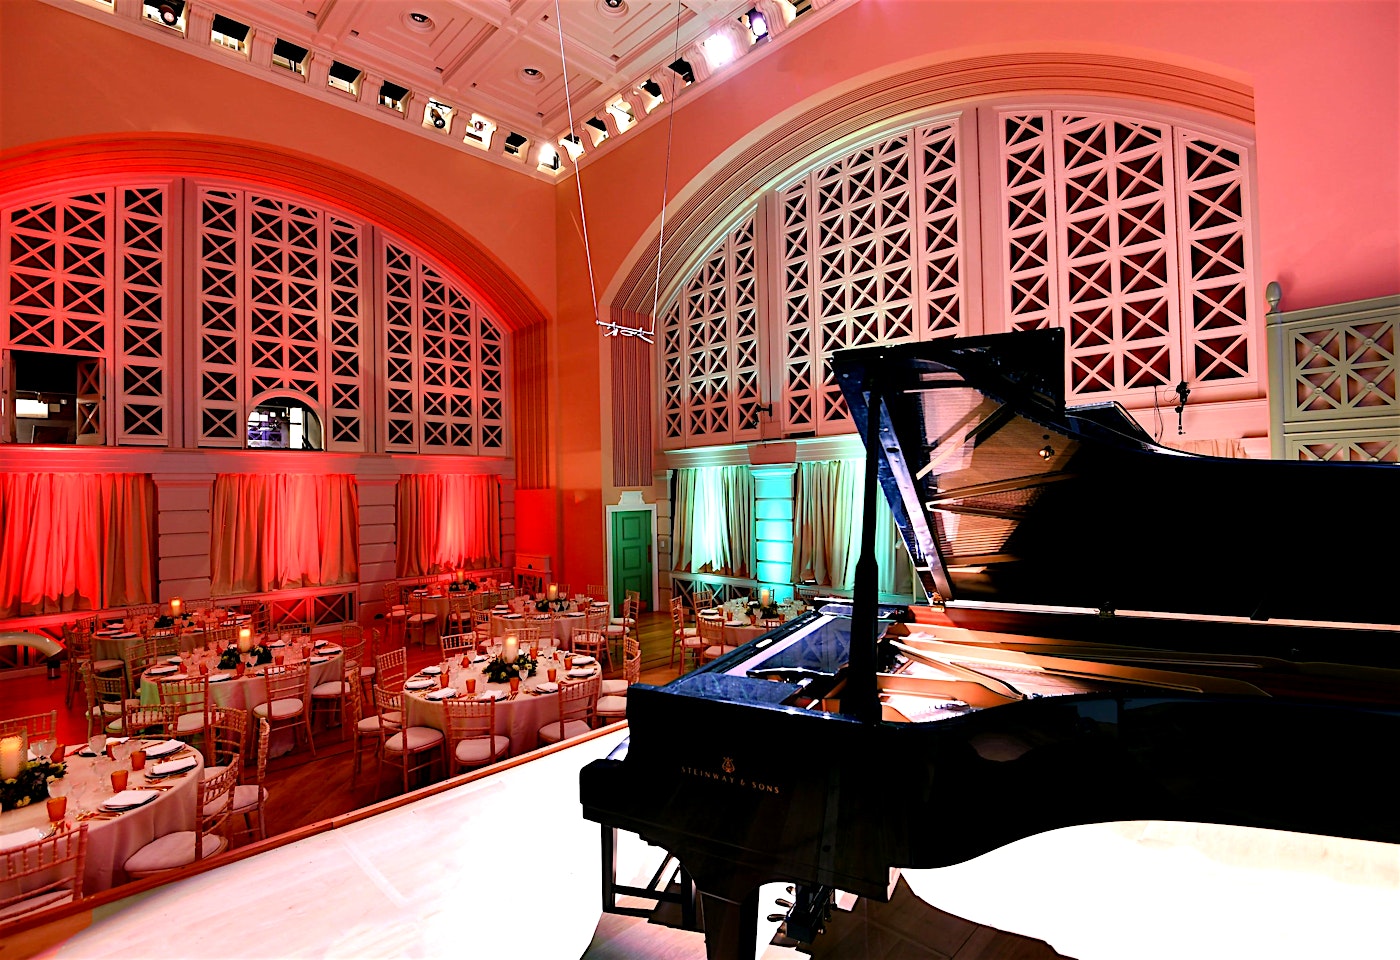 The Royal College of Music Performance Hall London